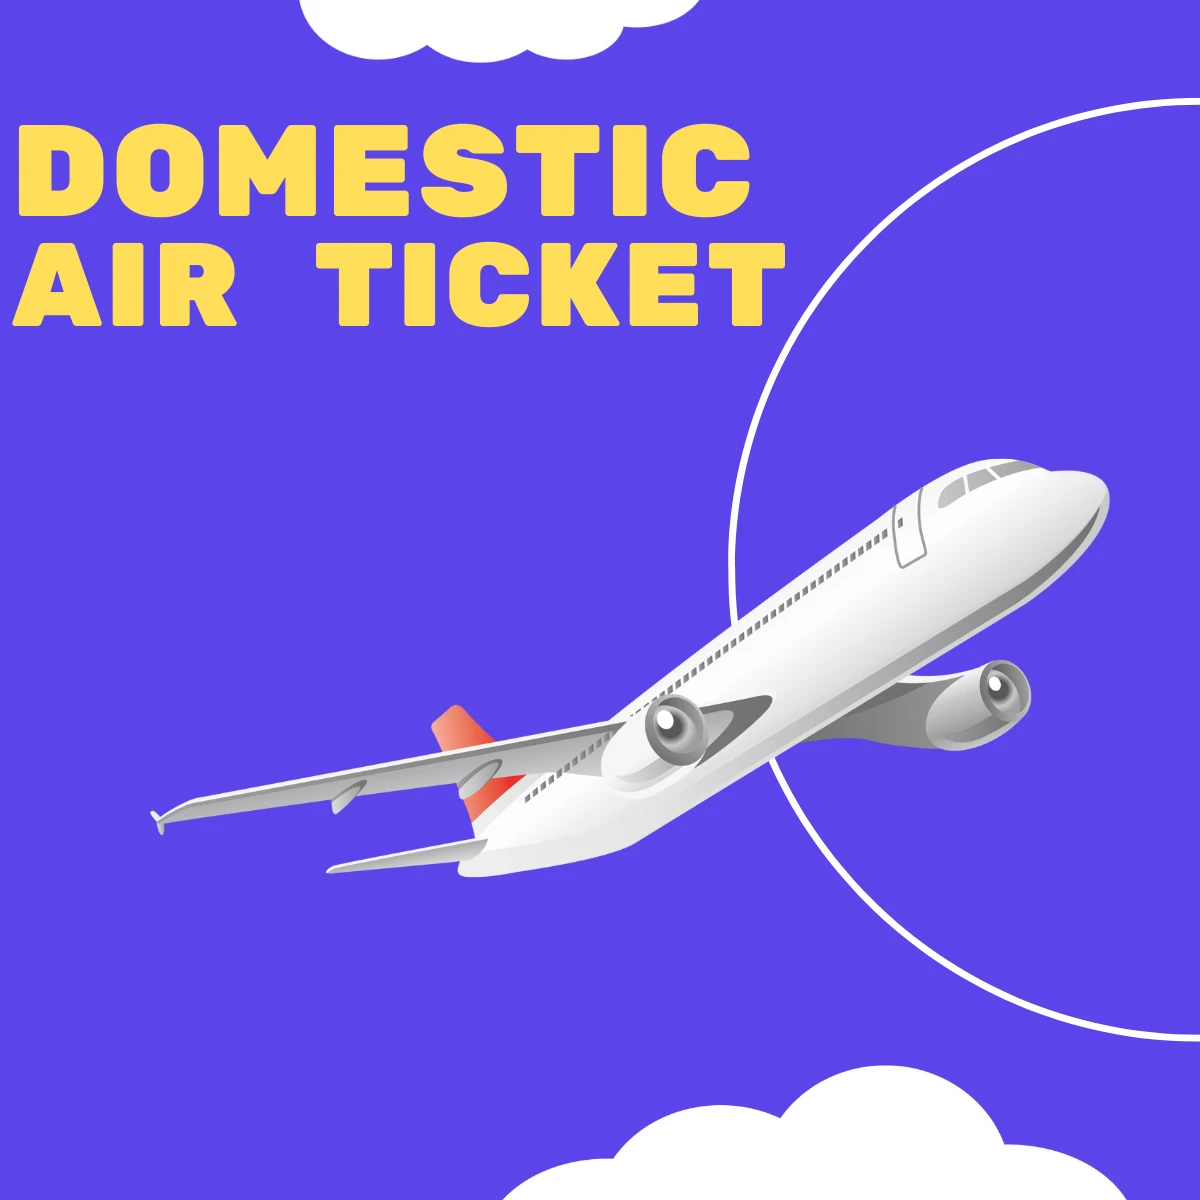 DOMESTIC AIR TICKET